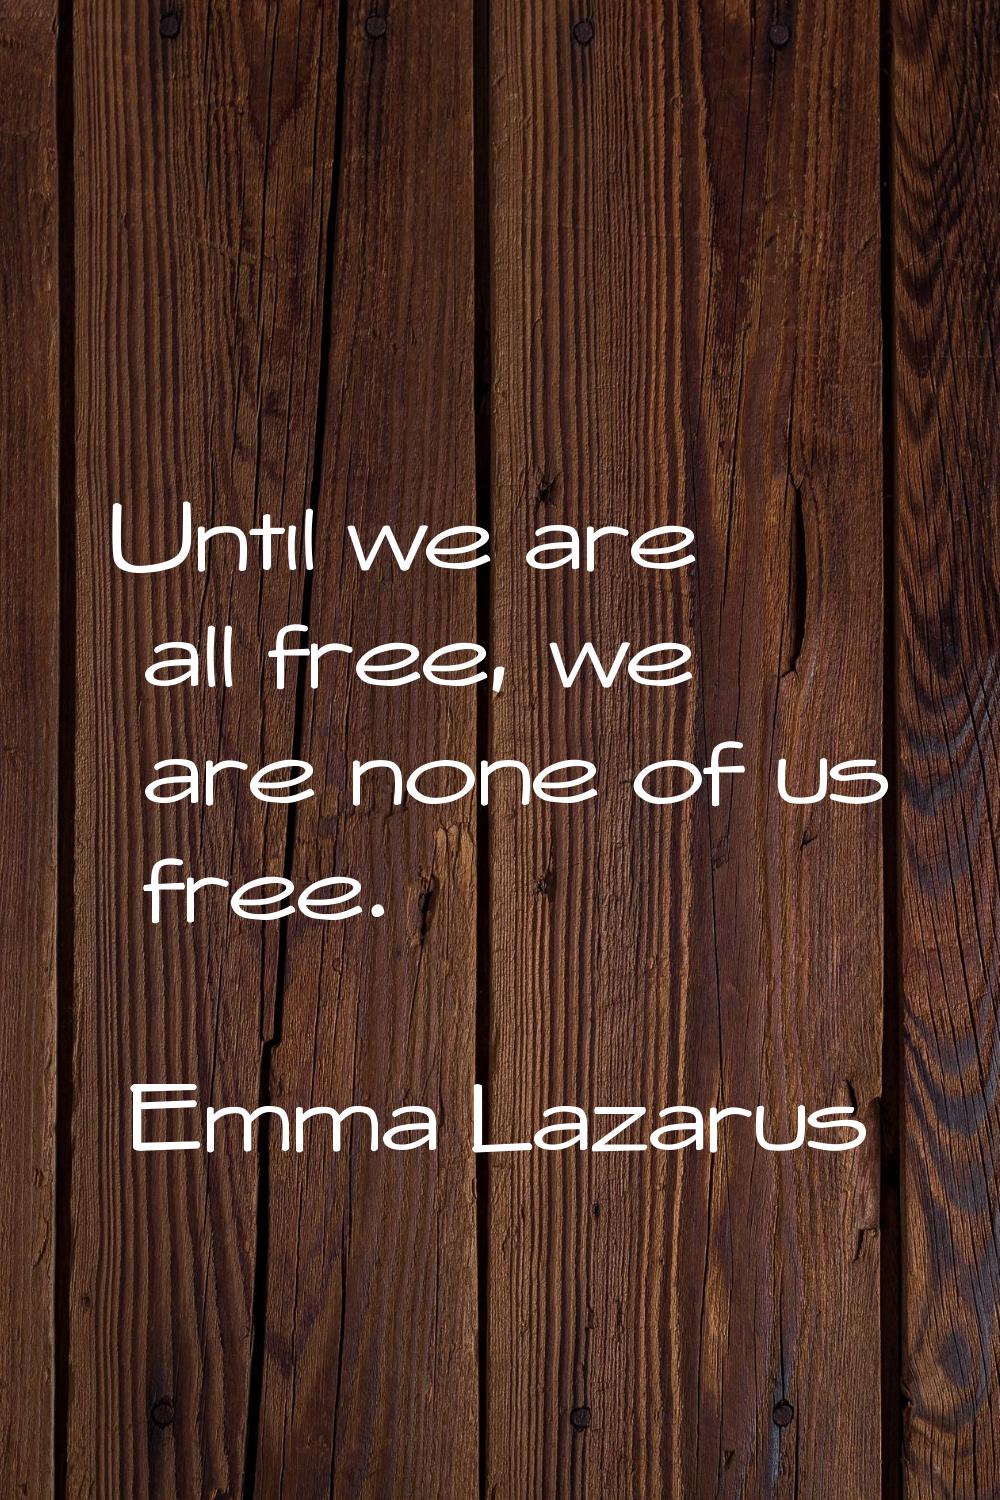 Until we are all free, we are none of us free.